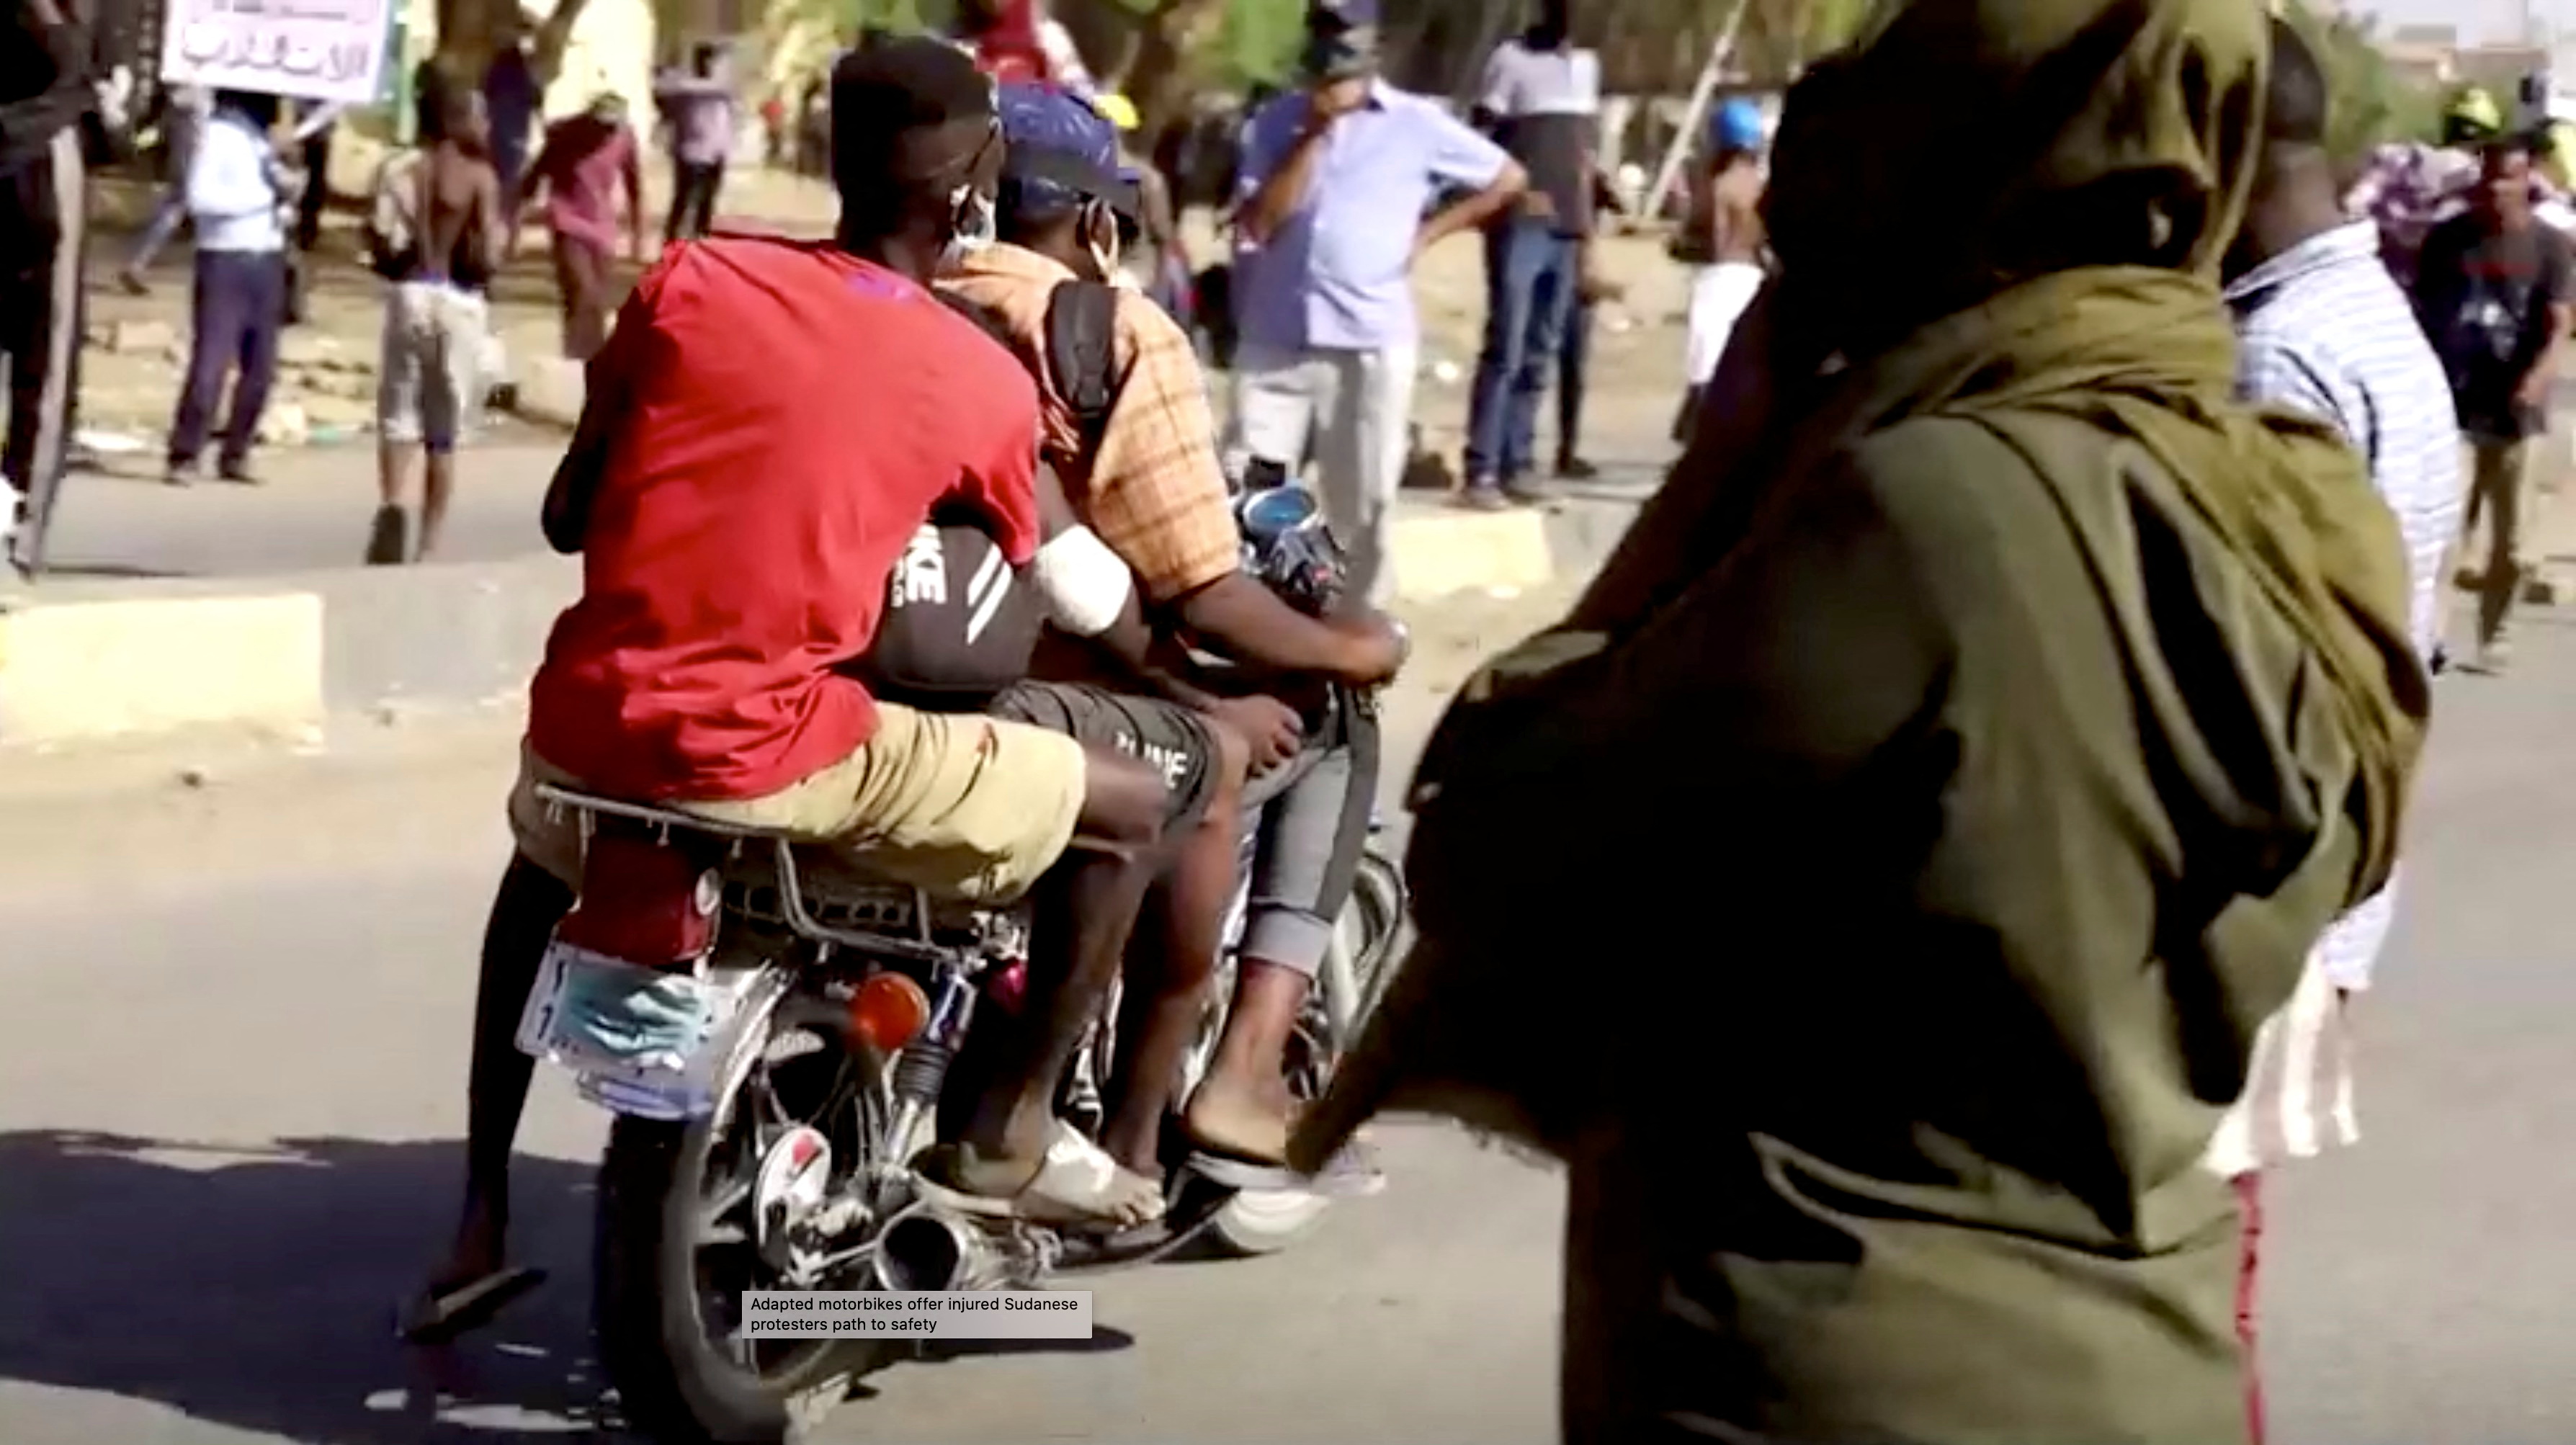 Adapted motorbikes offer injured Sudanese protesters path to safety in Khartoum